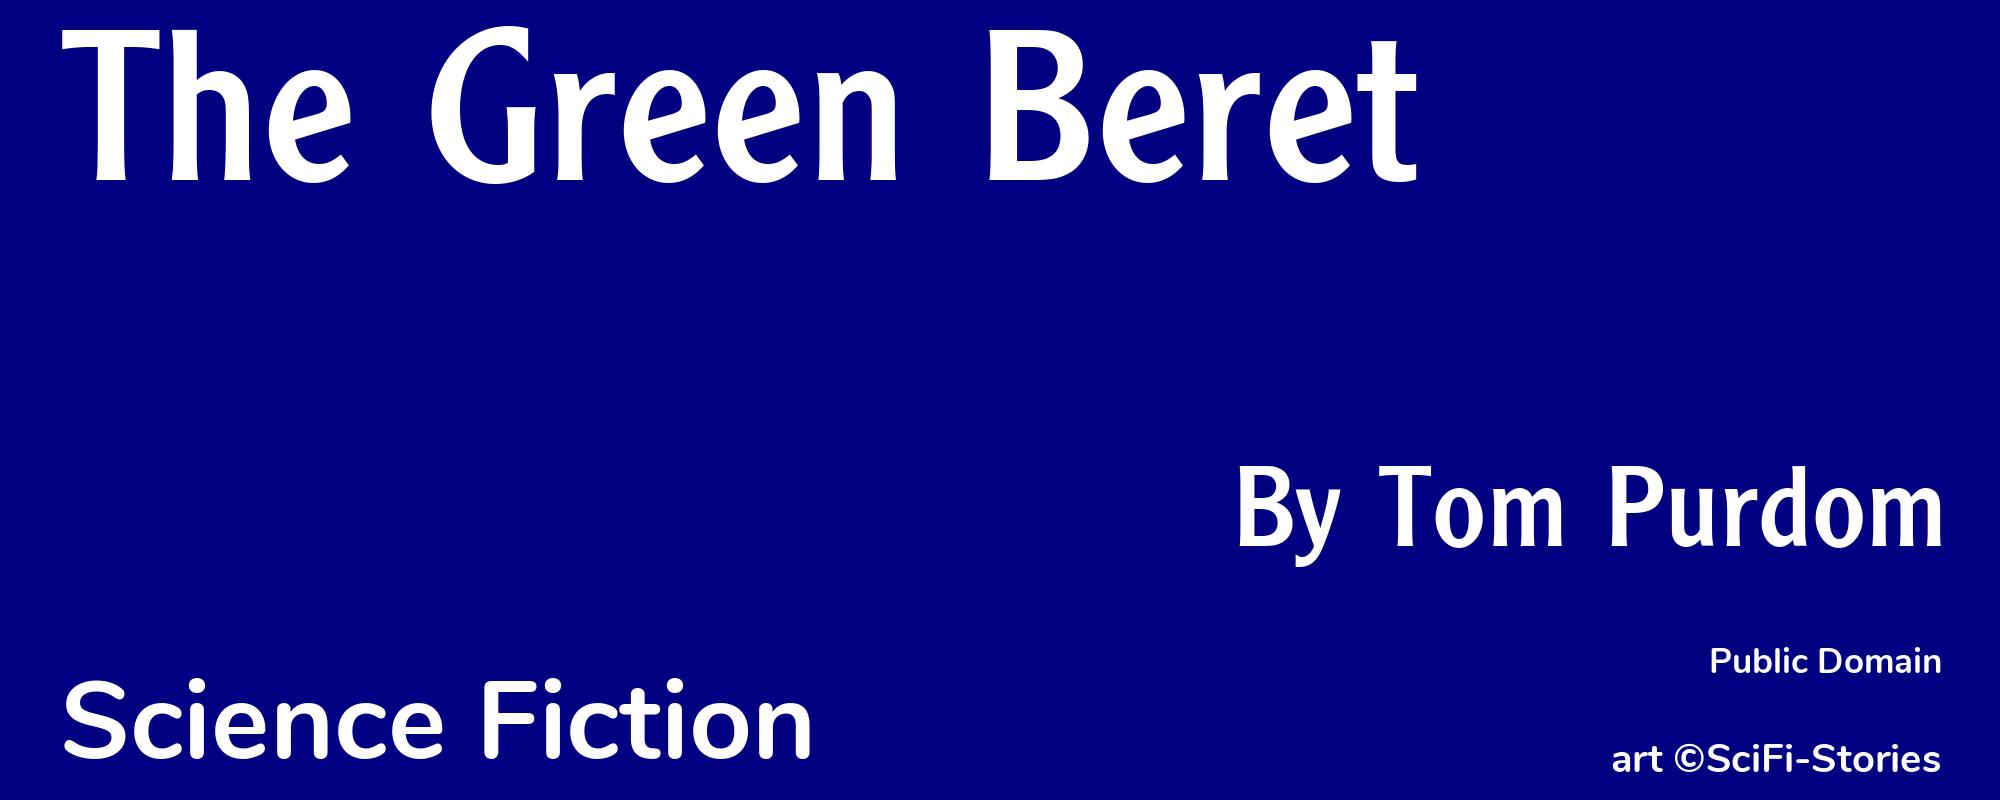 The Green Beret - Cover